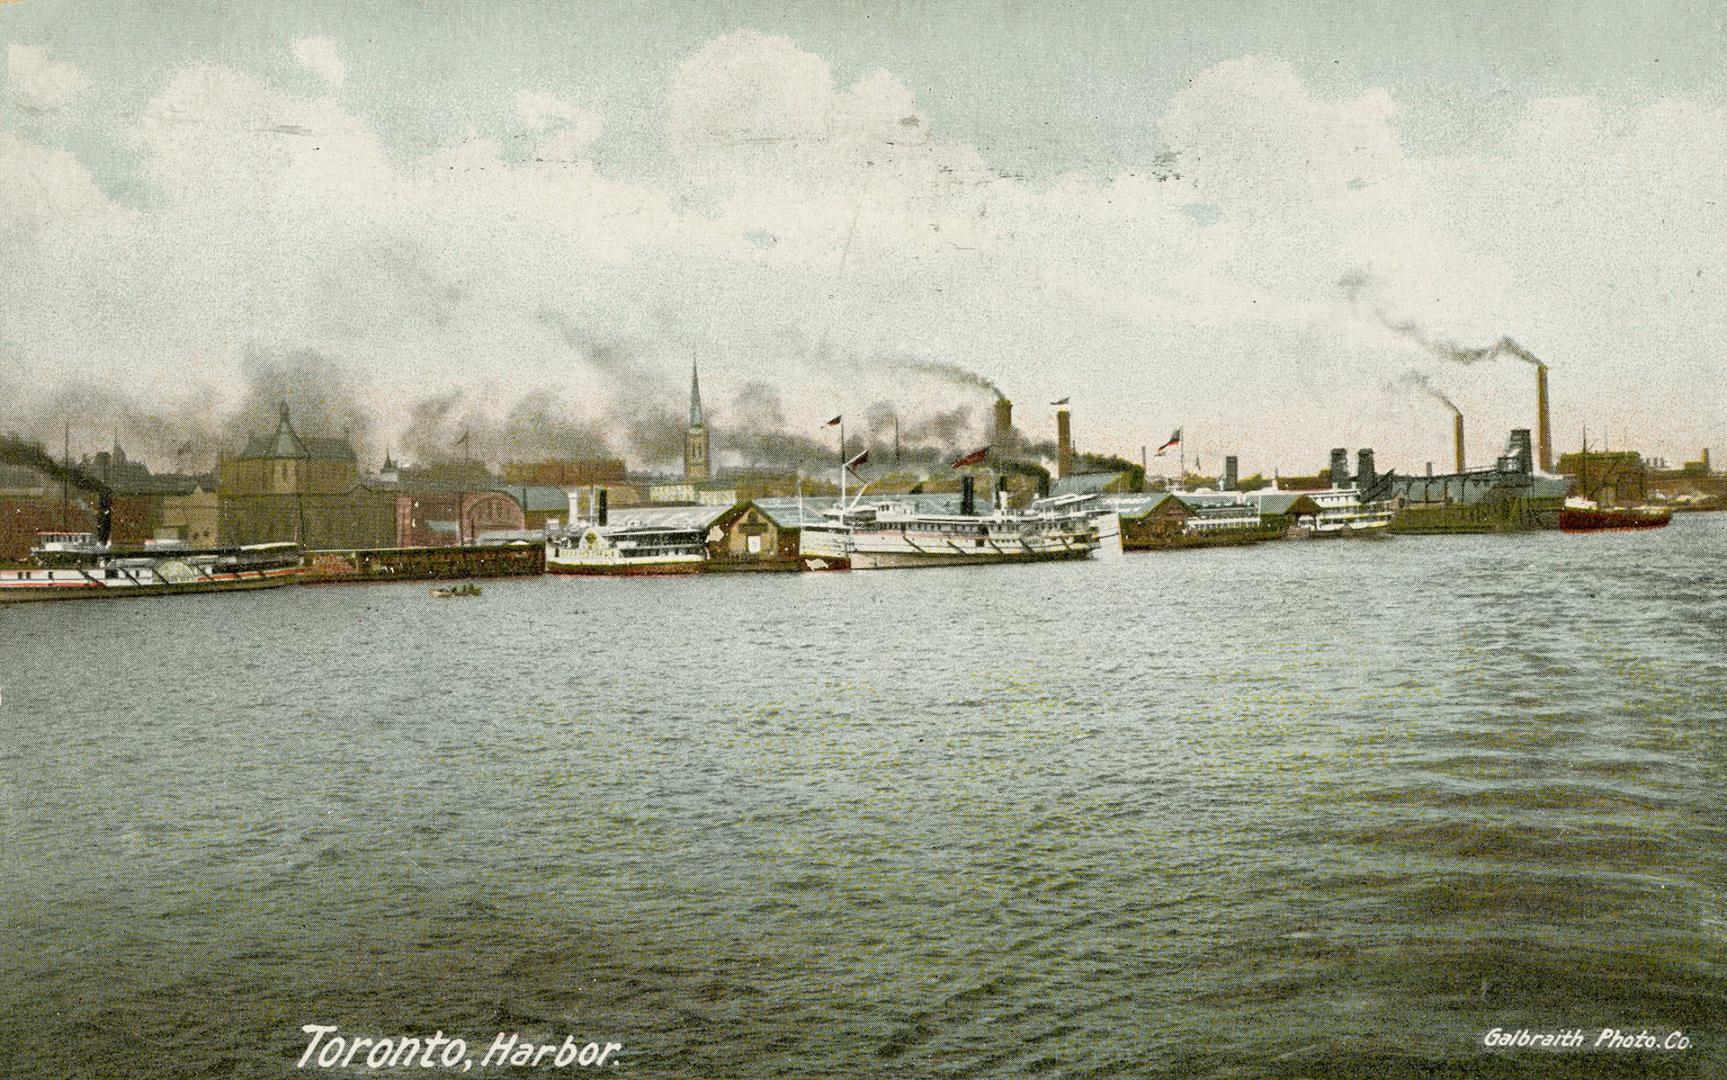 Colorized photograph of steamships in a harbour.